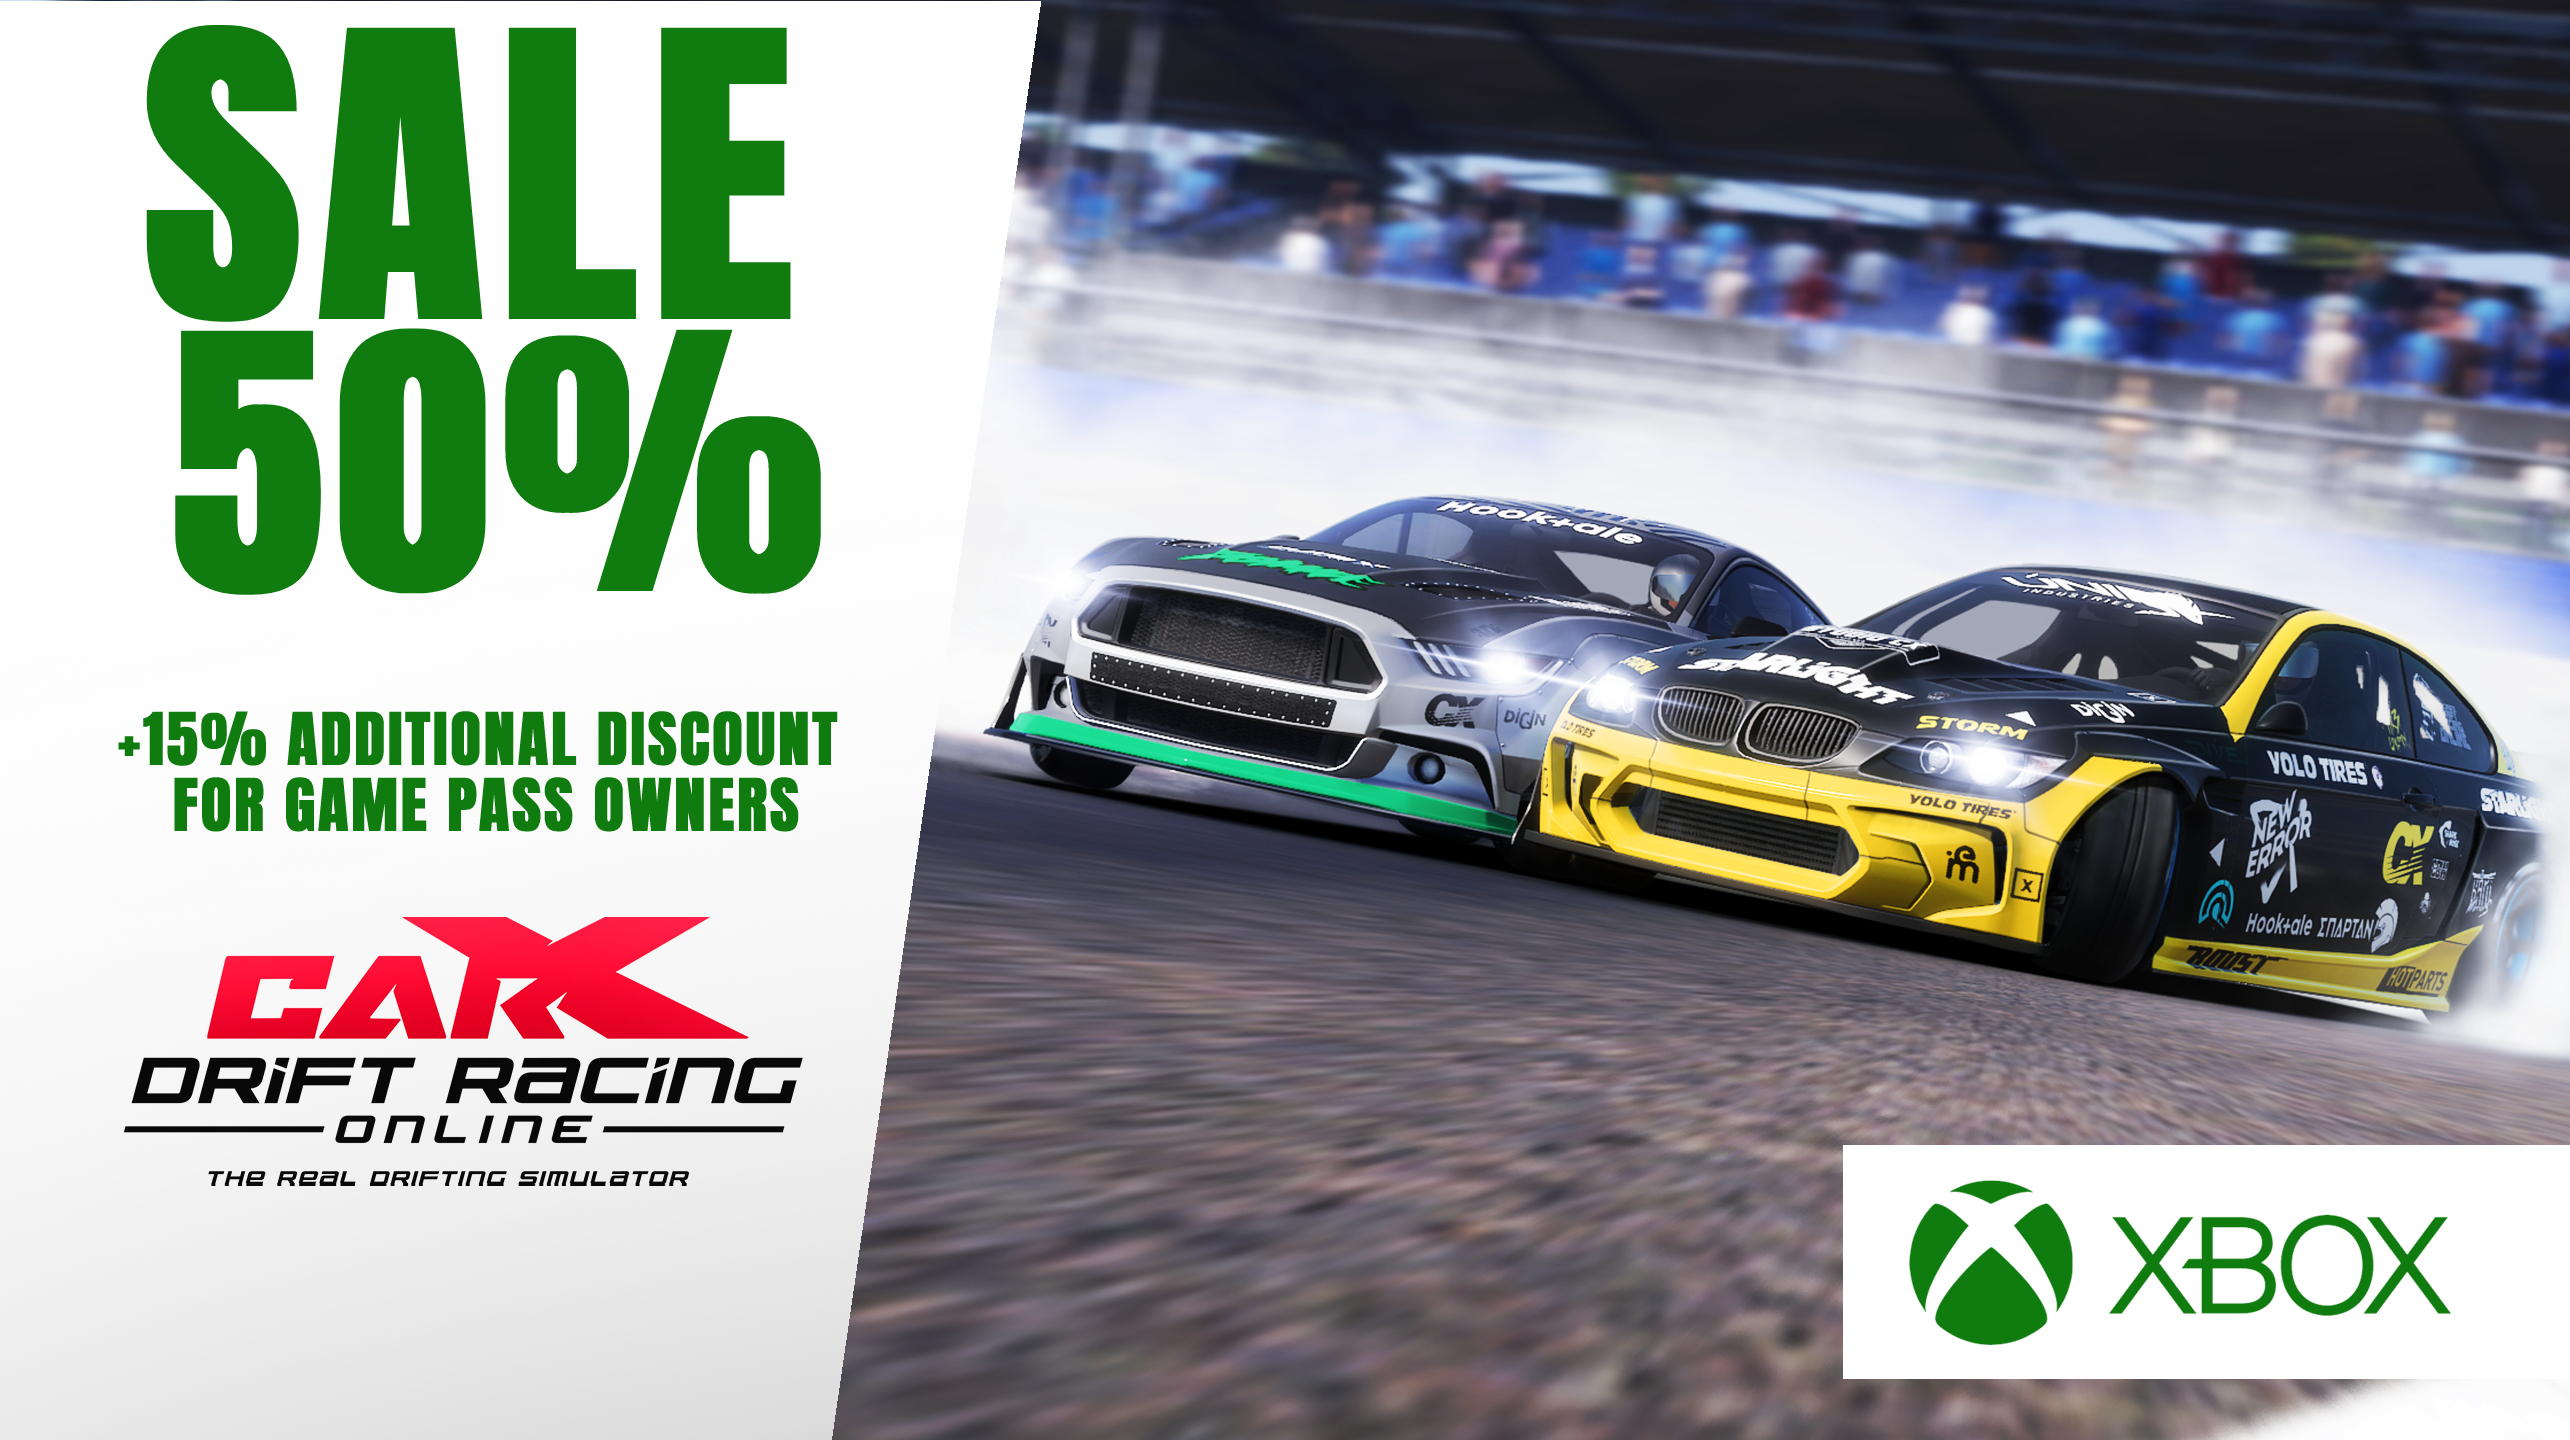 CarX Technologies on X: What's up drivers!💥 CarX Drift Racing Online for  Xbox is now available with 50% off! 🔥 And Game Pass owners can get  additional 15% discount!👀 Check it out!